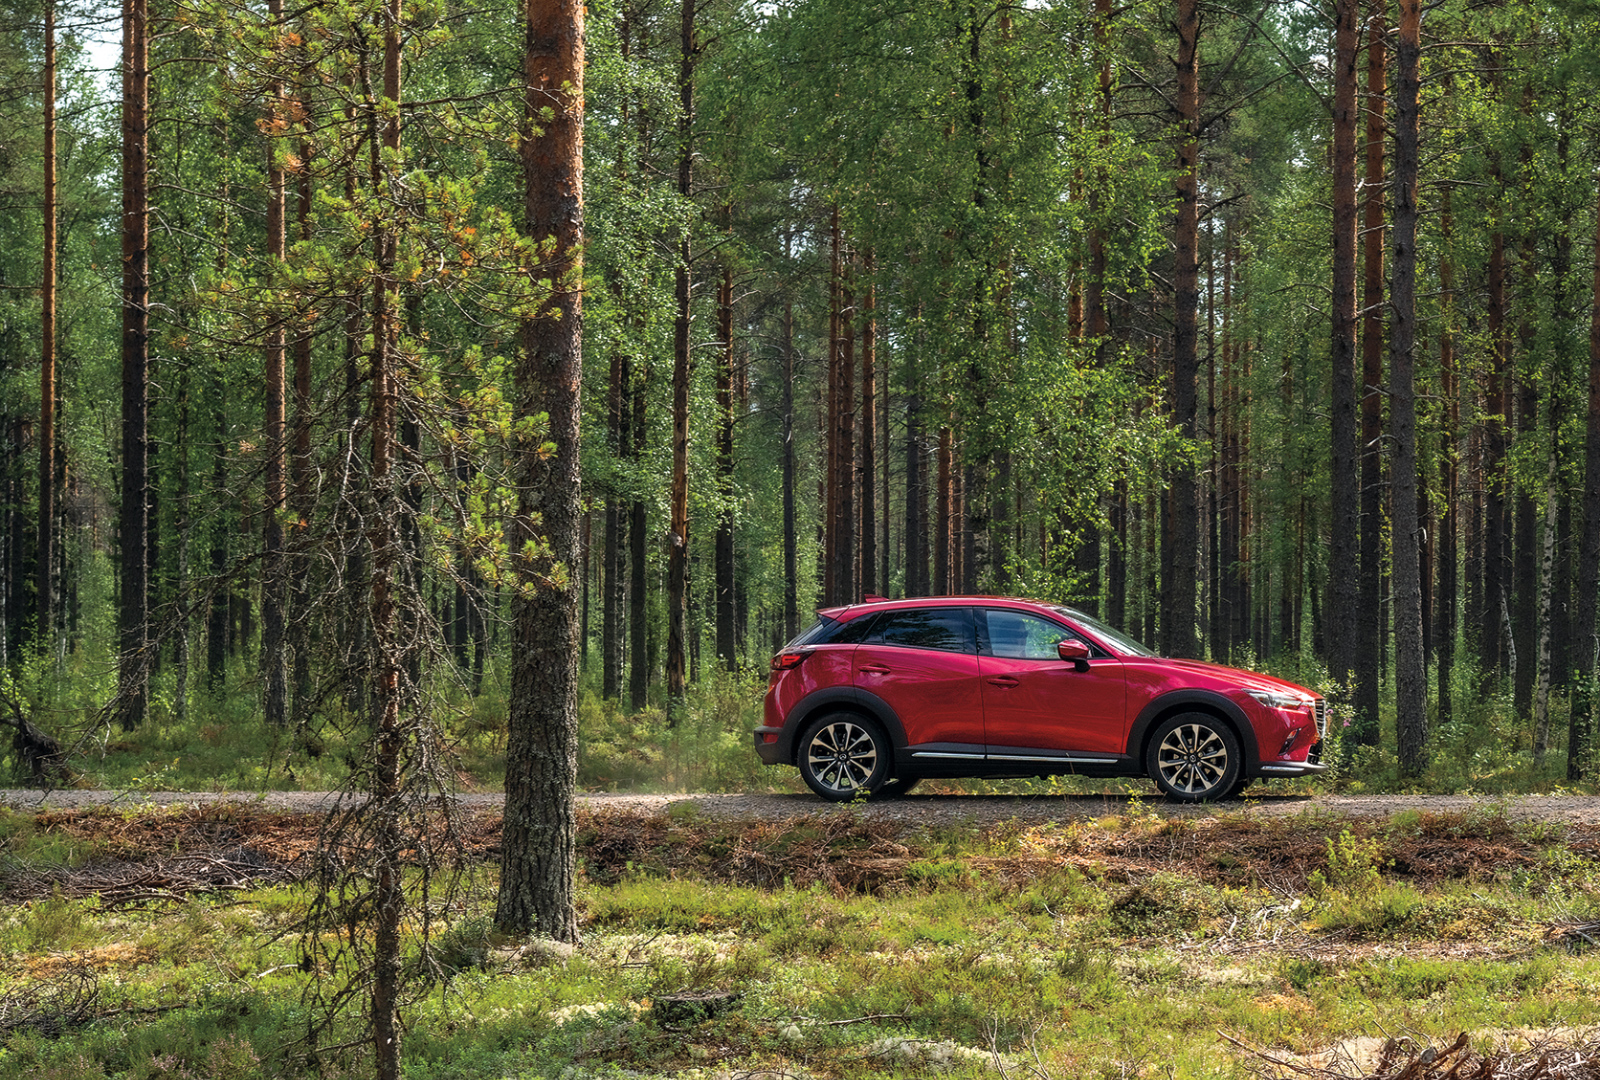 Red Mazda CX-5 in profile on forest road with tall trees in background.